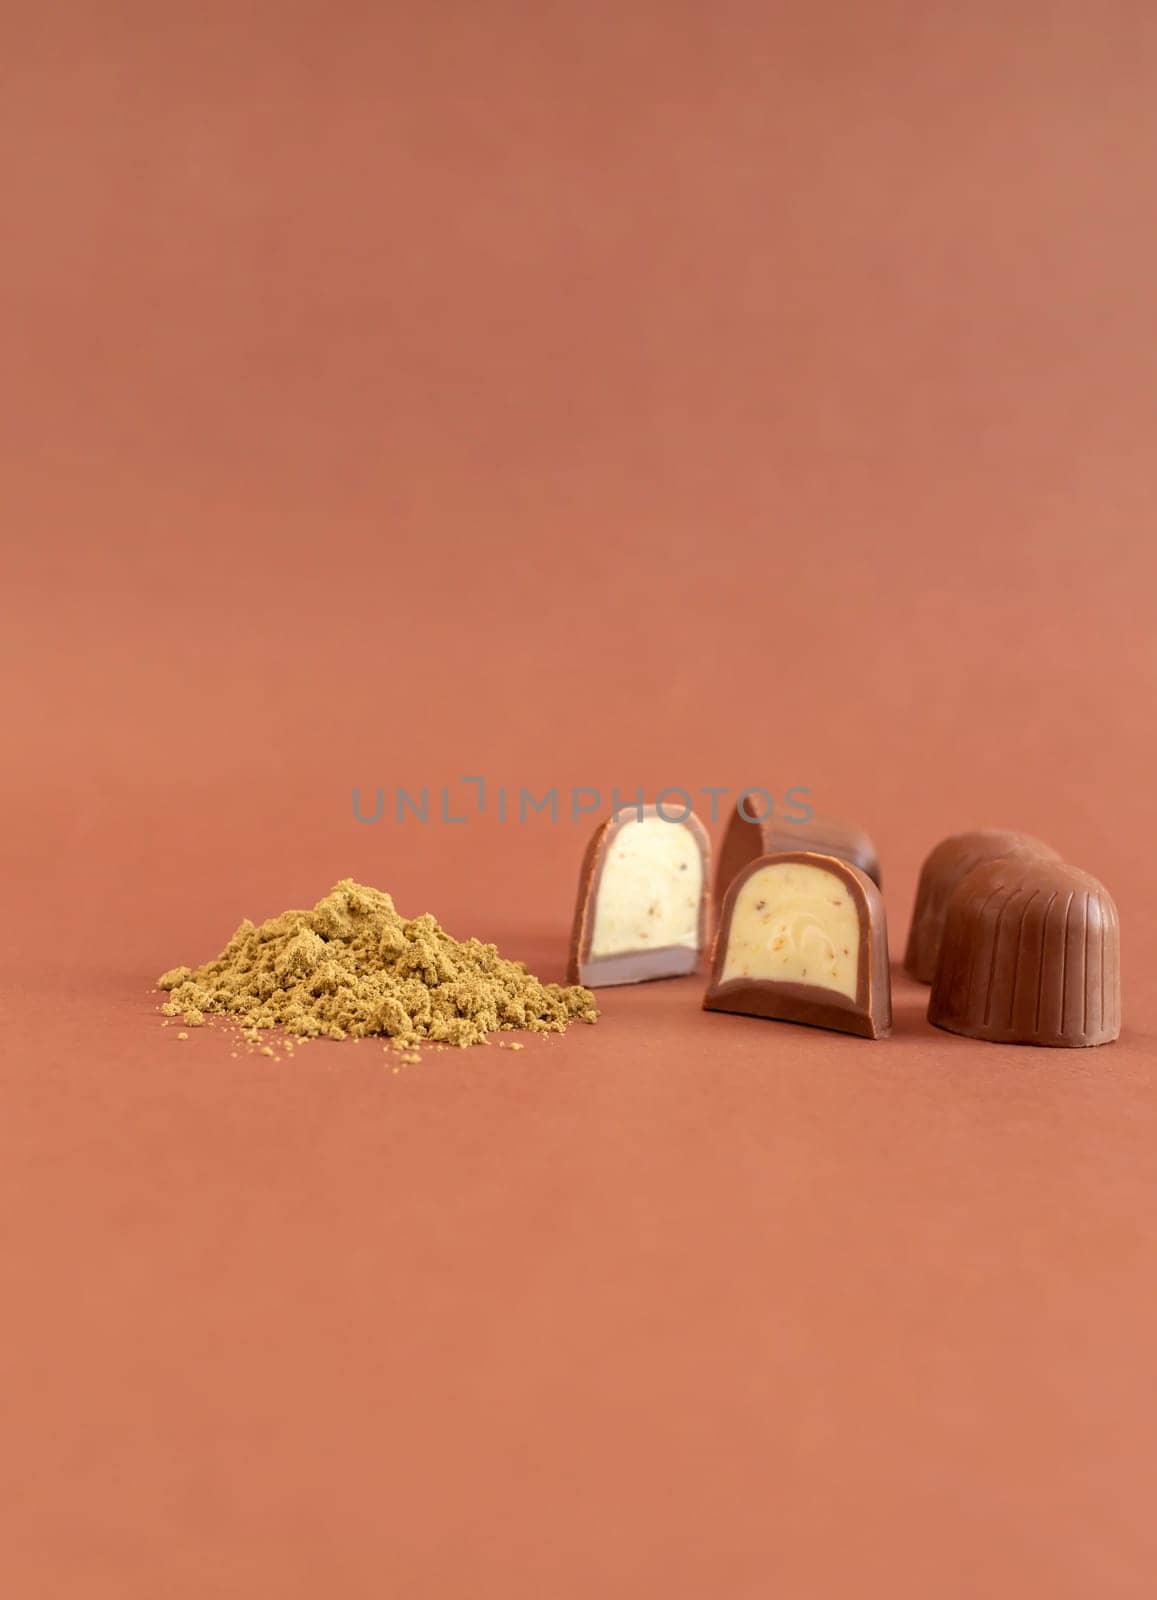 Mockup Brown Cannabis Chocolate Sweets And Green Hemp Protein Powder On Brown Background. Vertical Plane. Copy Space For Text. Healthy Snack. High quality photo